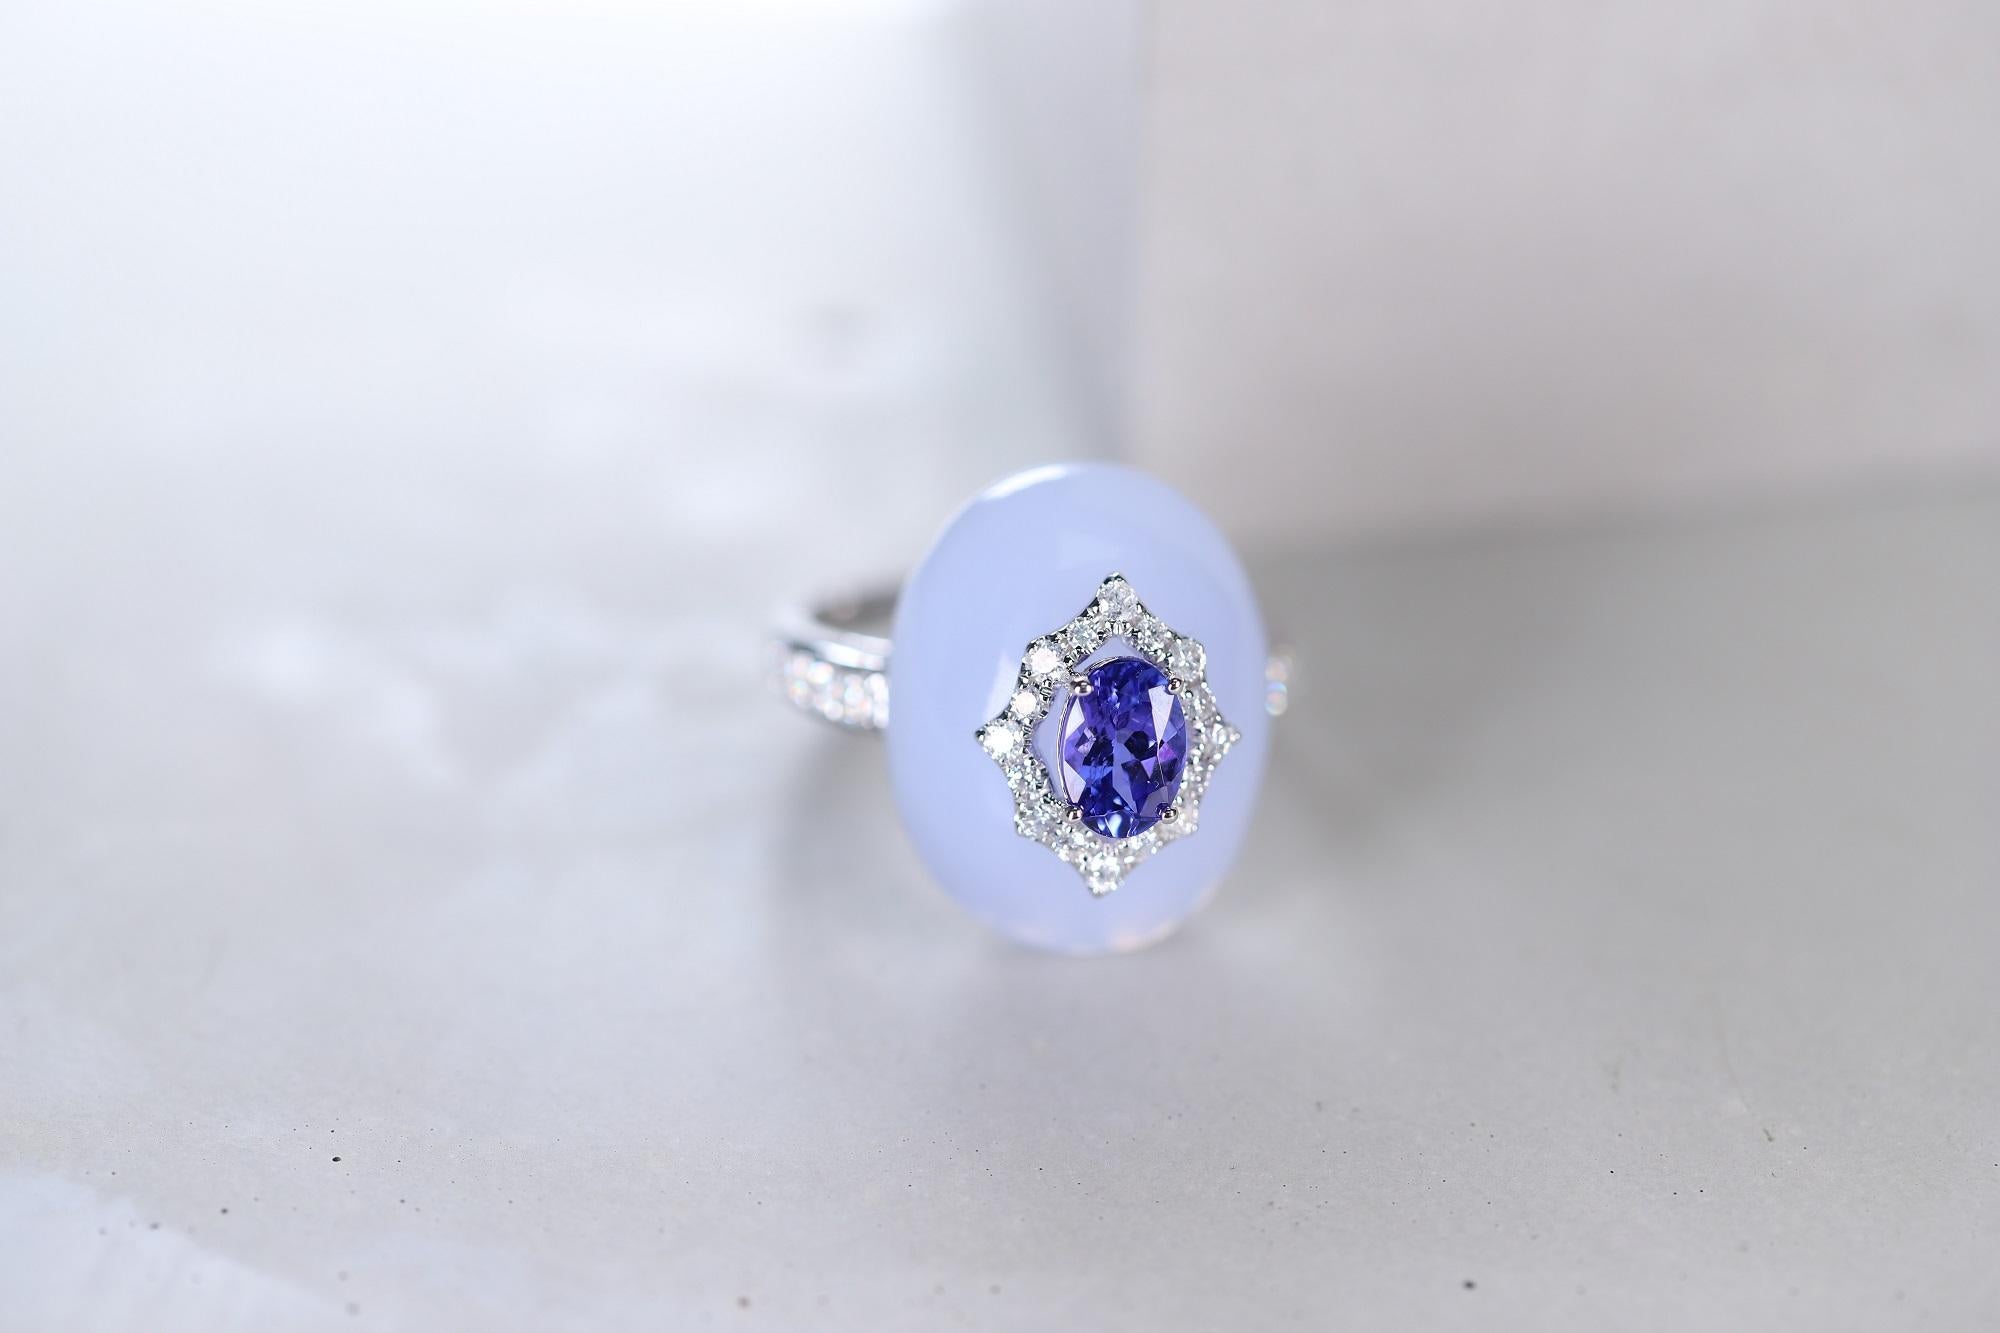 Stunning, timeless and classy eternity Unique Ring. Decorate yourself in luxury with this Gin & Grace Ring. The 14k White Gold jewelry boasts Oval-cut Prong Setting Tanzanite (1 pcs) 0.86 Carat, Oval-cab Prong Setting Chalcedony (1 pcs) 15.63 Carat,